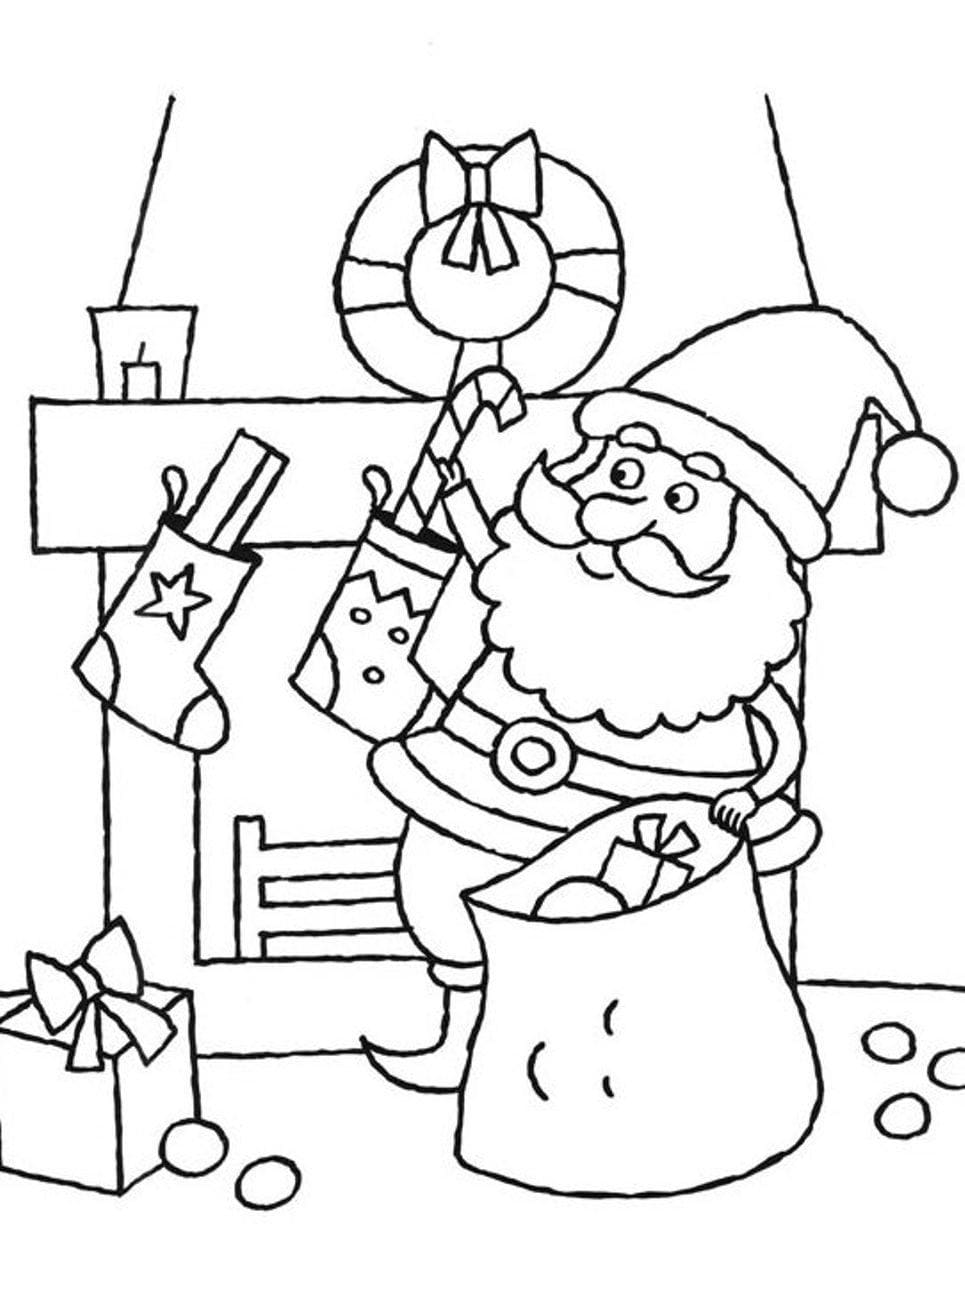 An Unexpected Surprise From Santa Claus Coloring Page